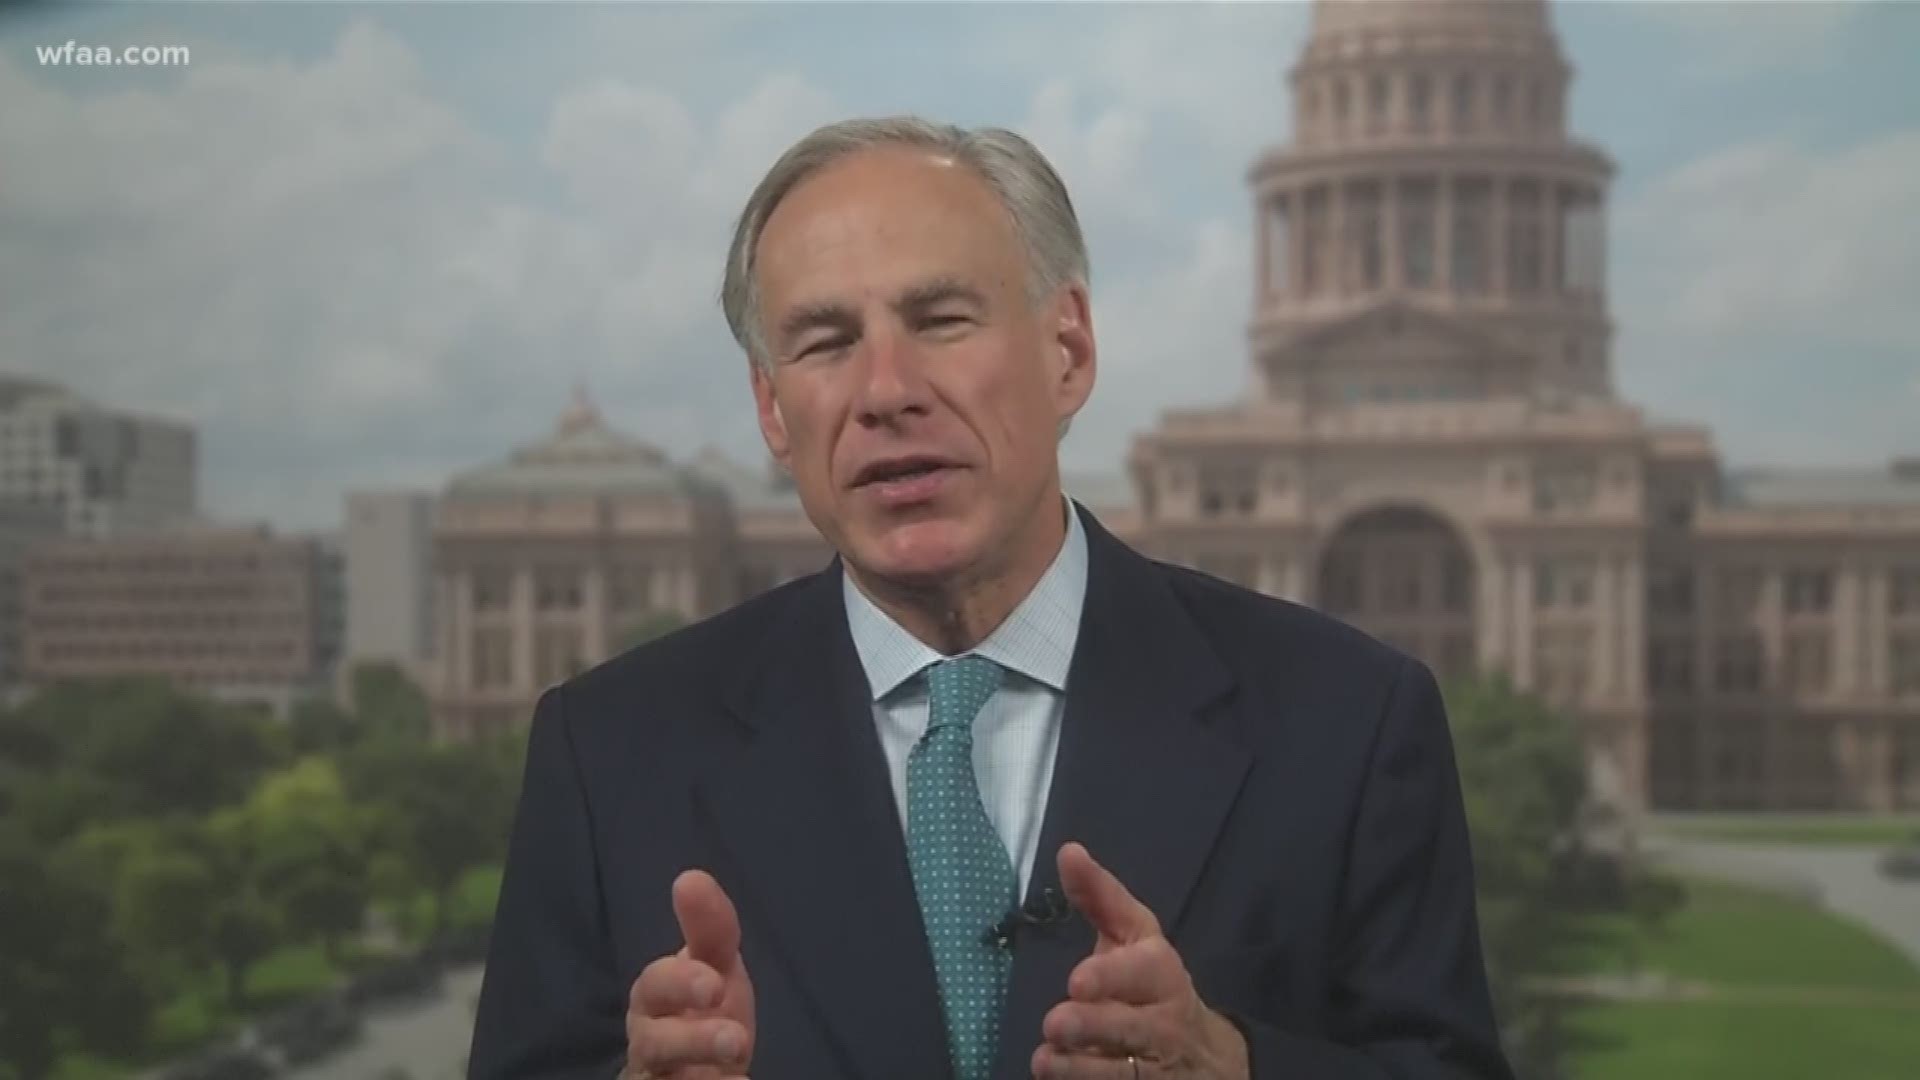 Abbott touted Texas as the perfect place to do business.